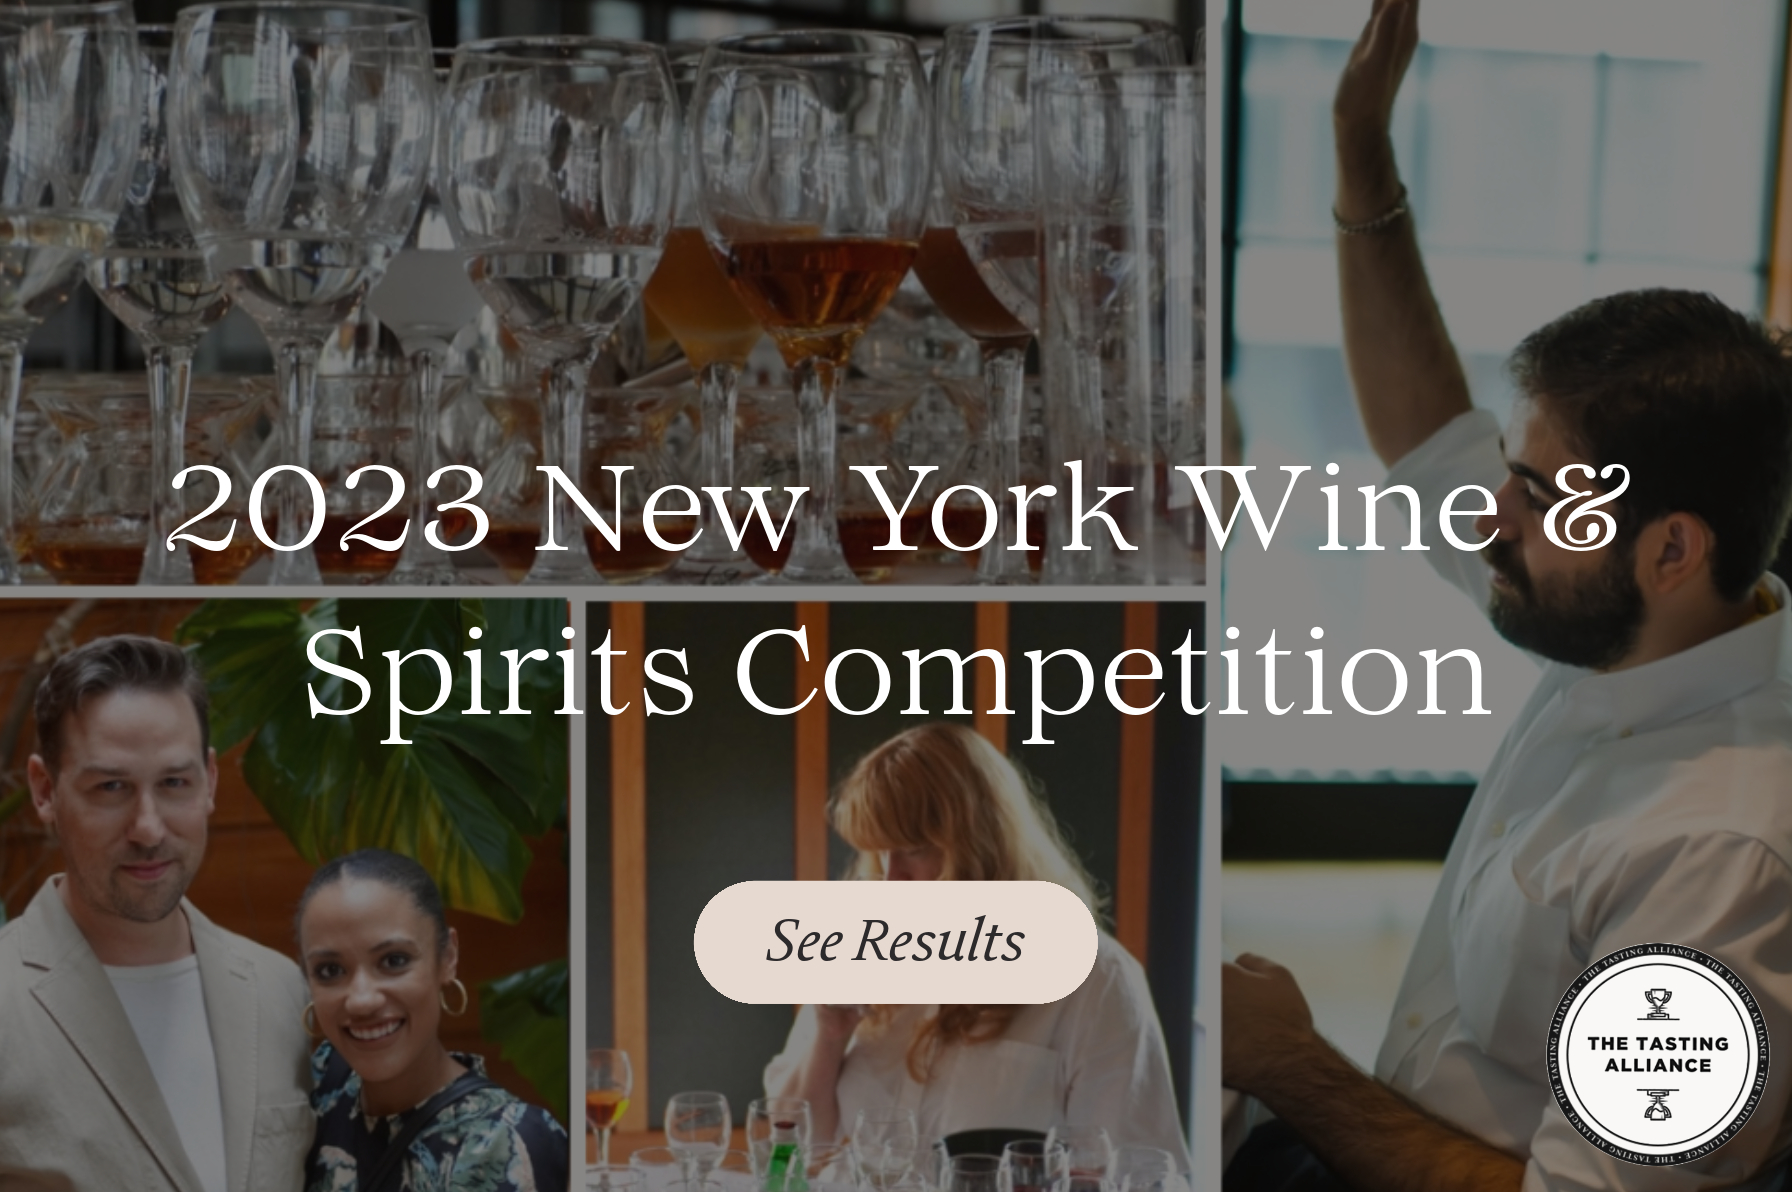 A collage of pictures from The Tasting Alliance's 2023 New York World Wine & Spirits